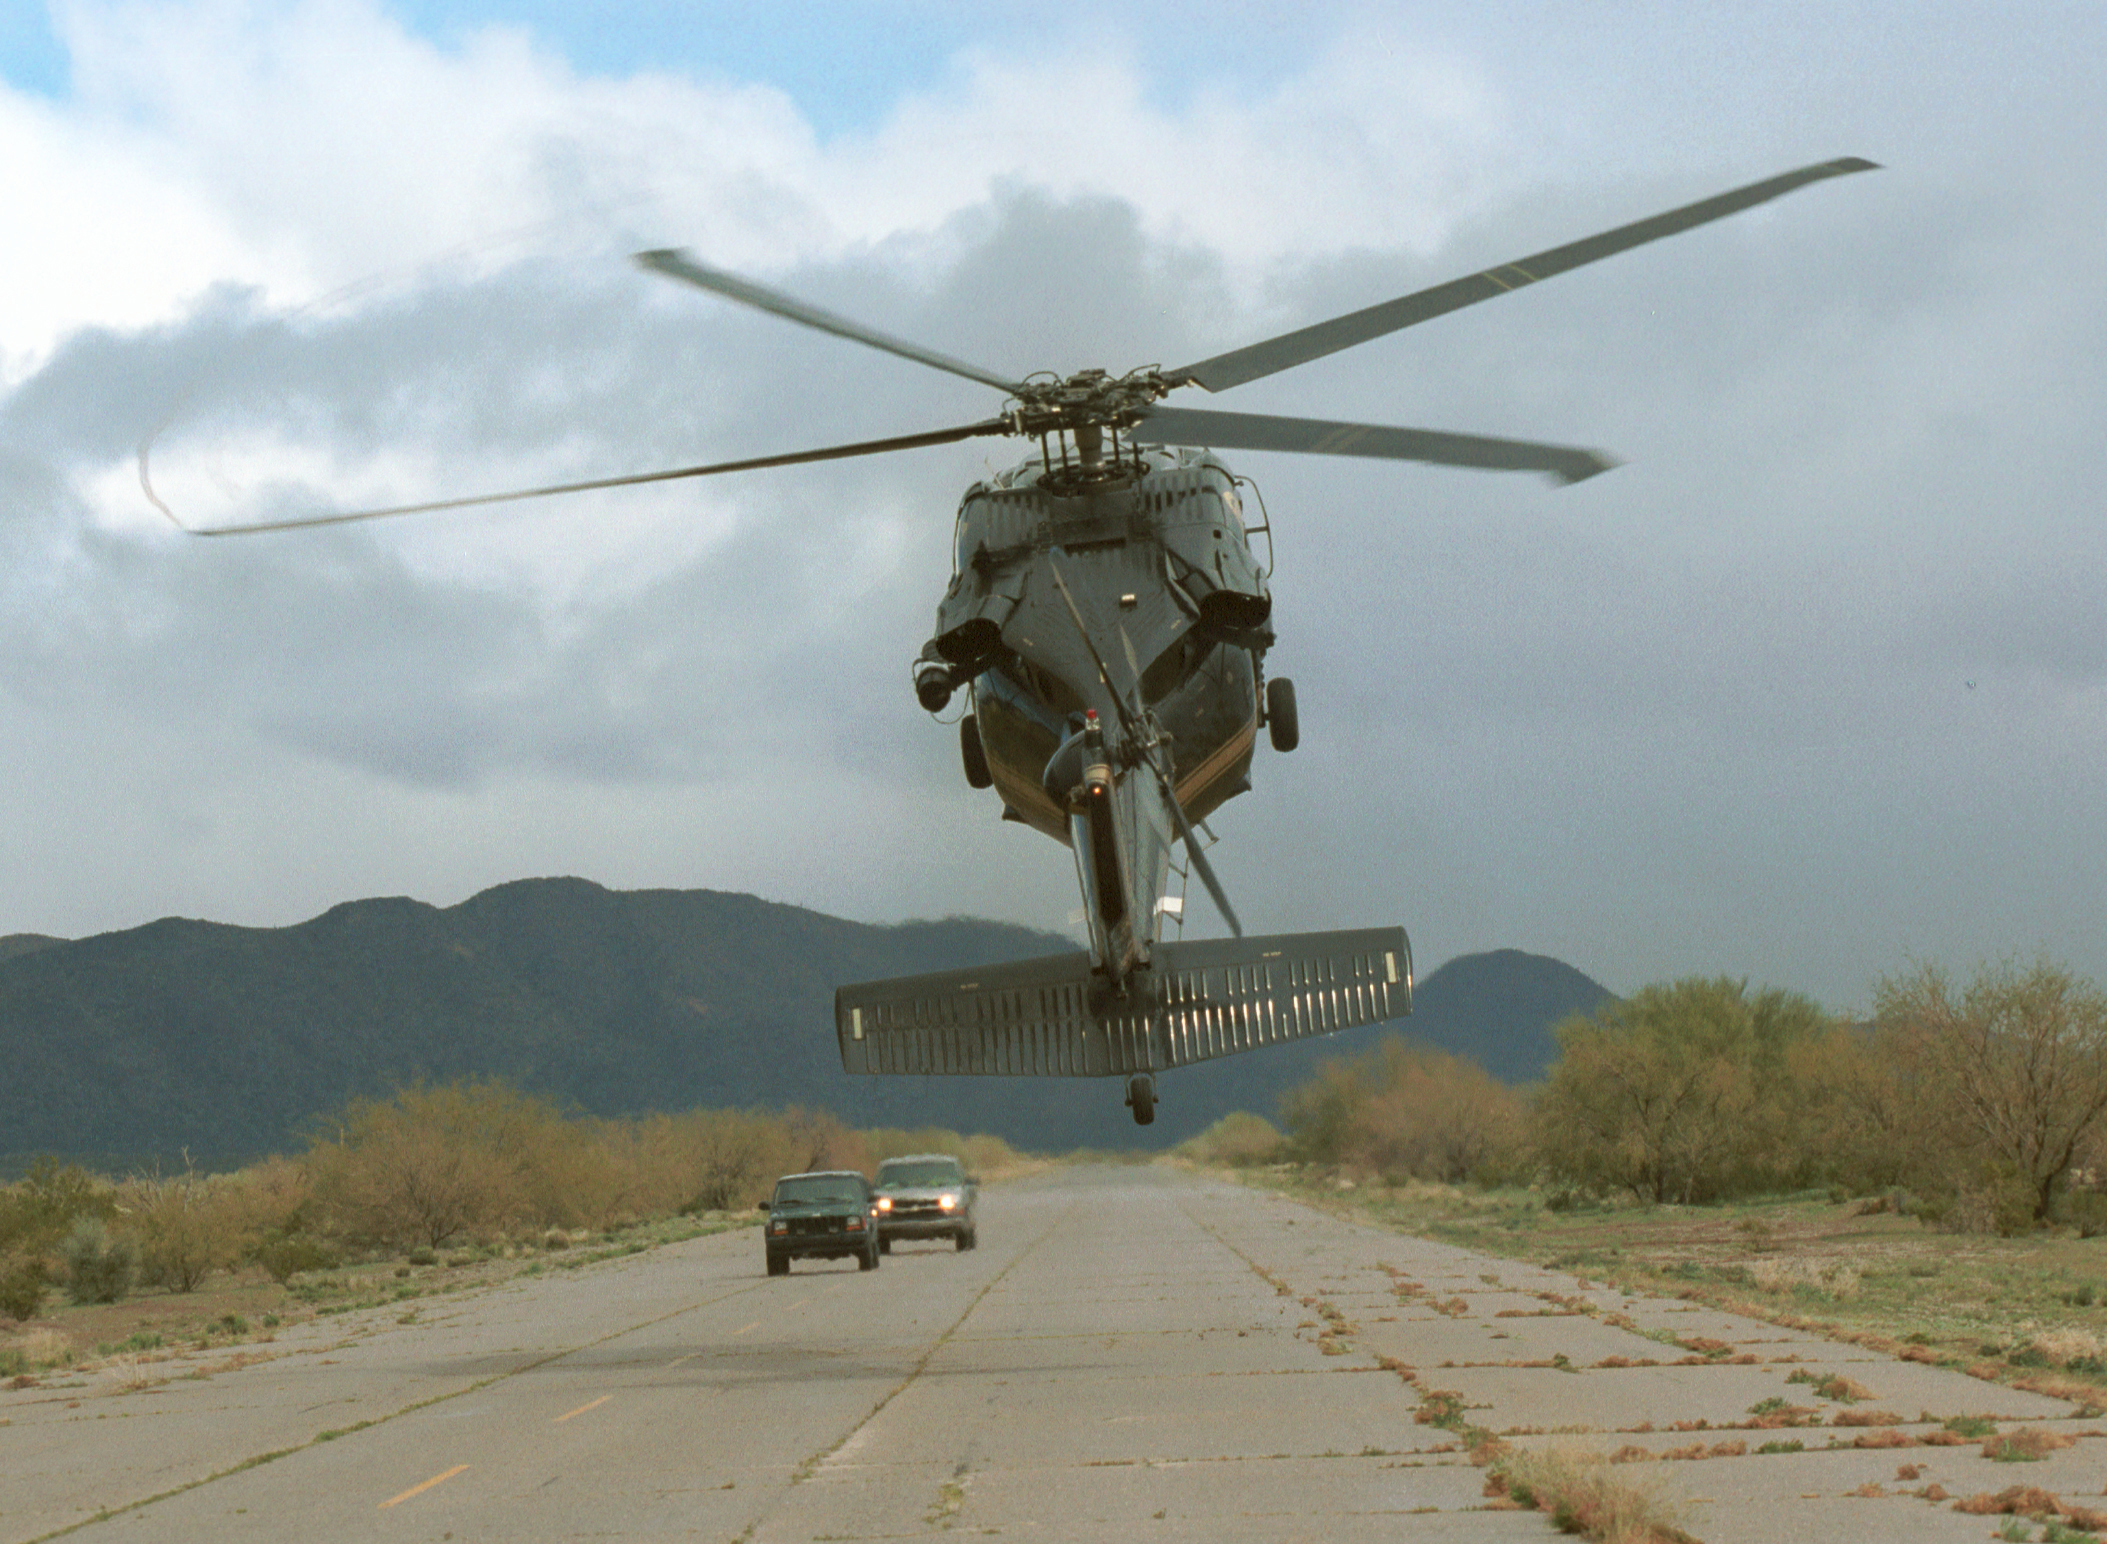 A CBP Air unit UH-60 Black Hawk helicopter intimidates two vehicles on a remote air strip in America's southwest border region.